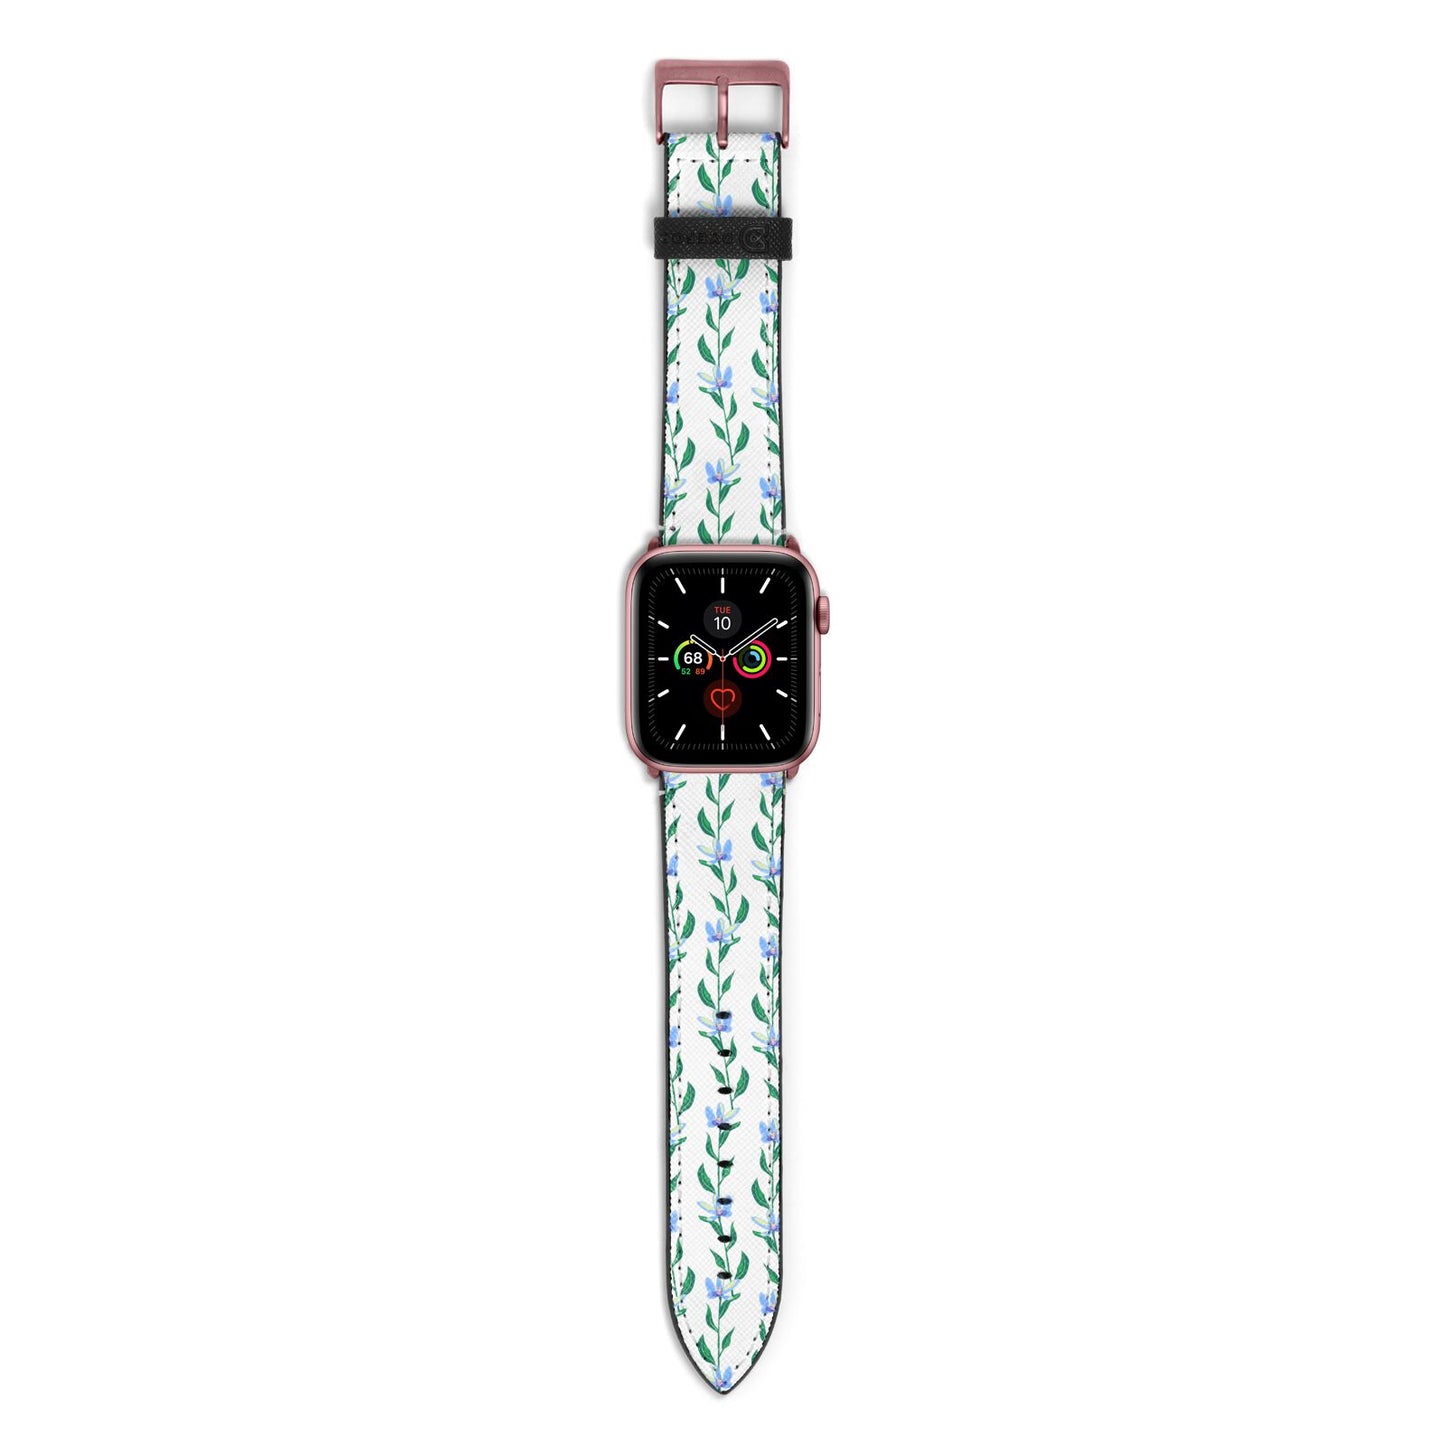 Flower Chain Apple Watch Strap with Rose Gold Hardware